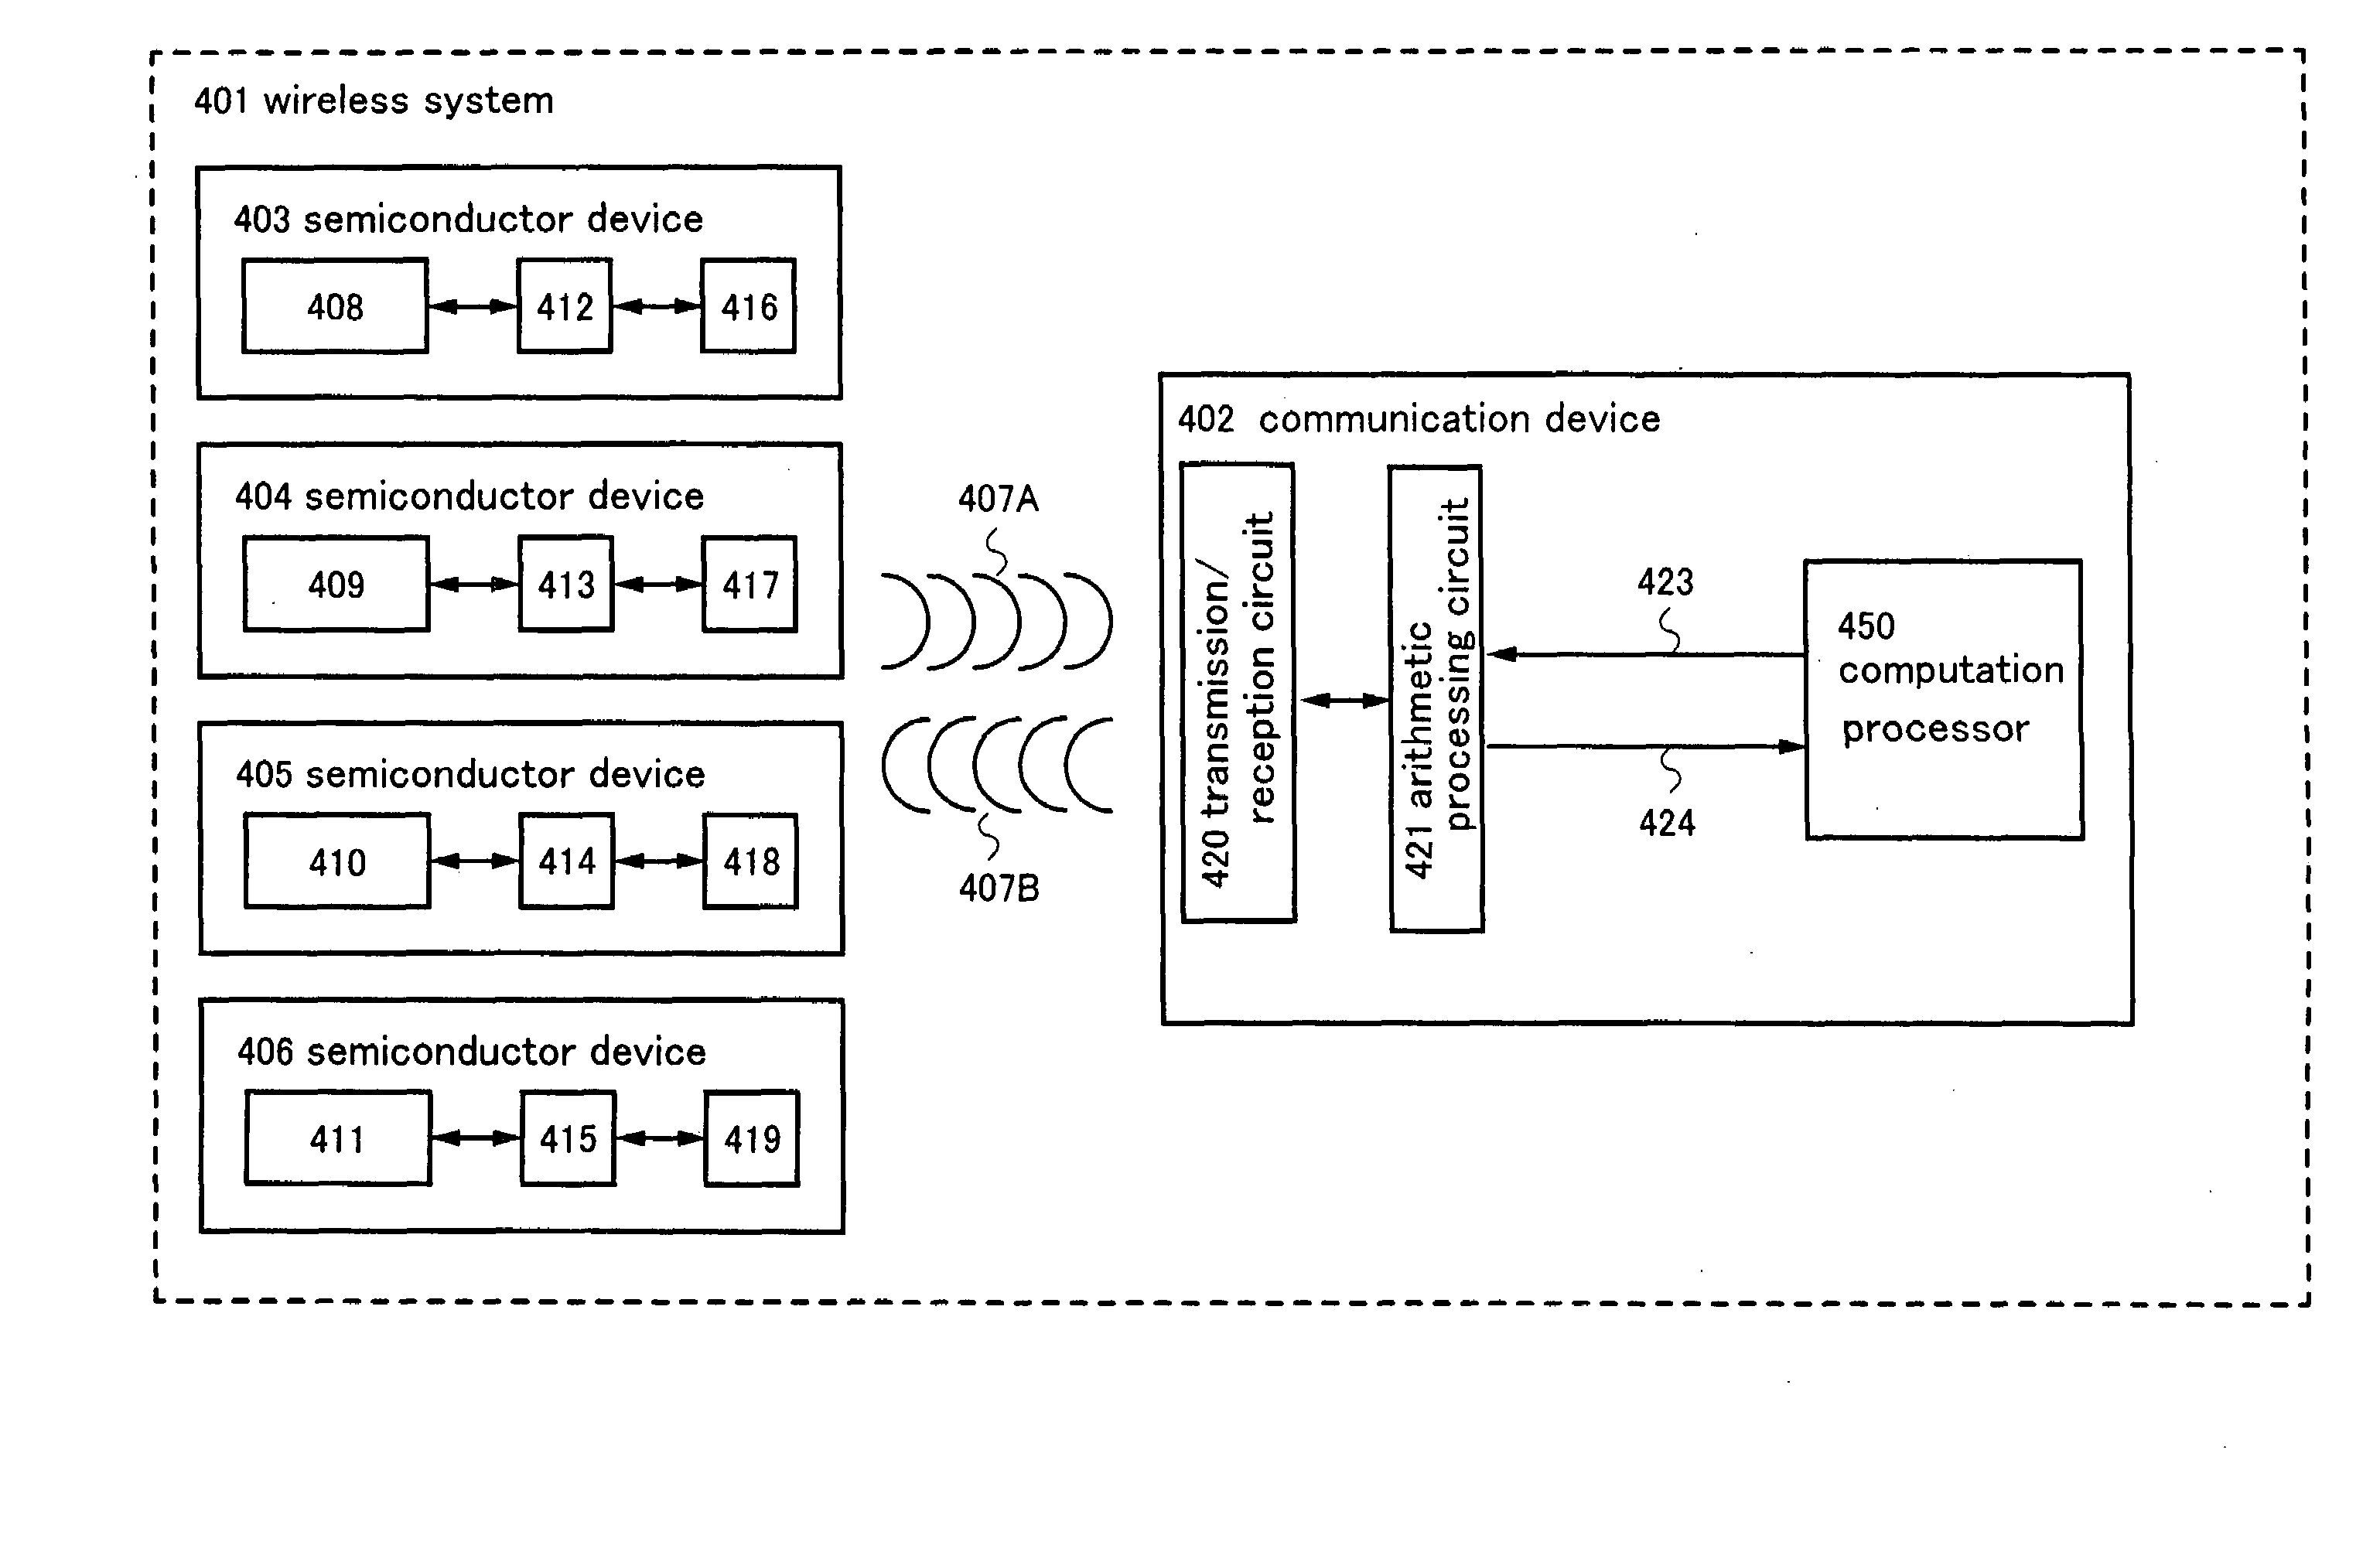 Wireless system, semiconductor device, and communication device